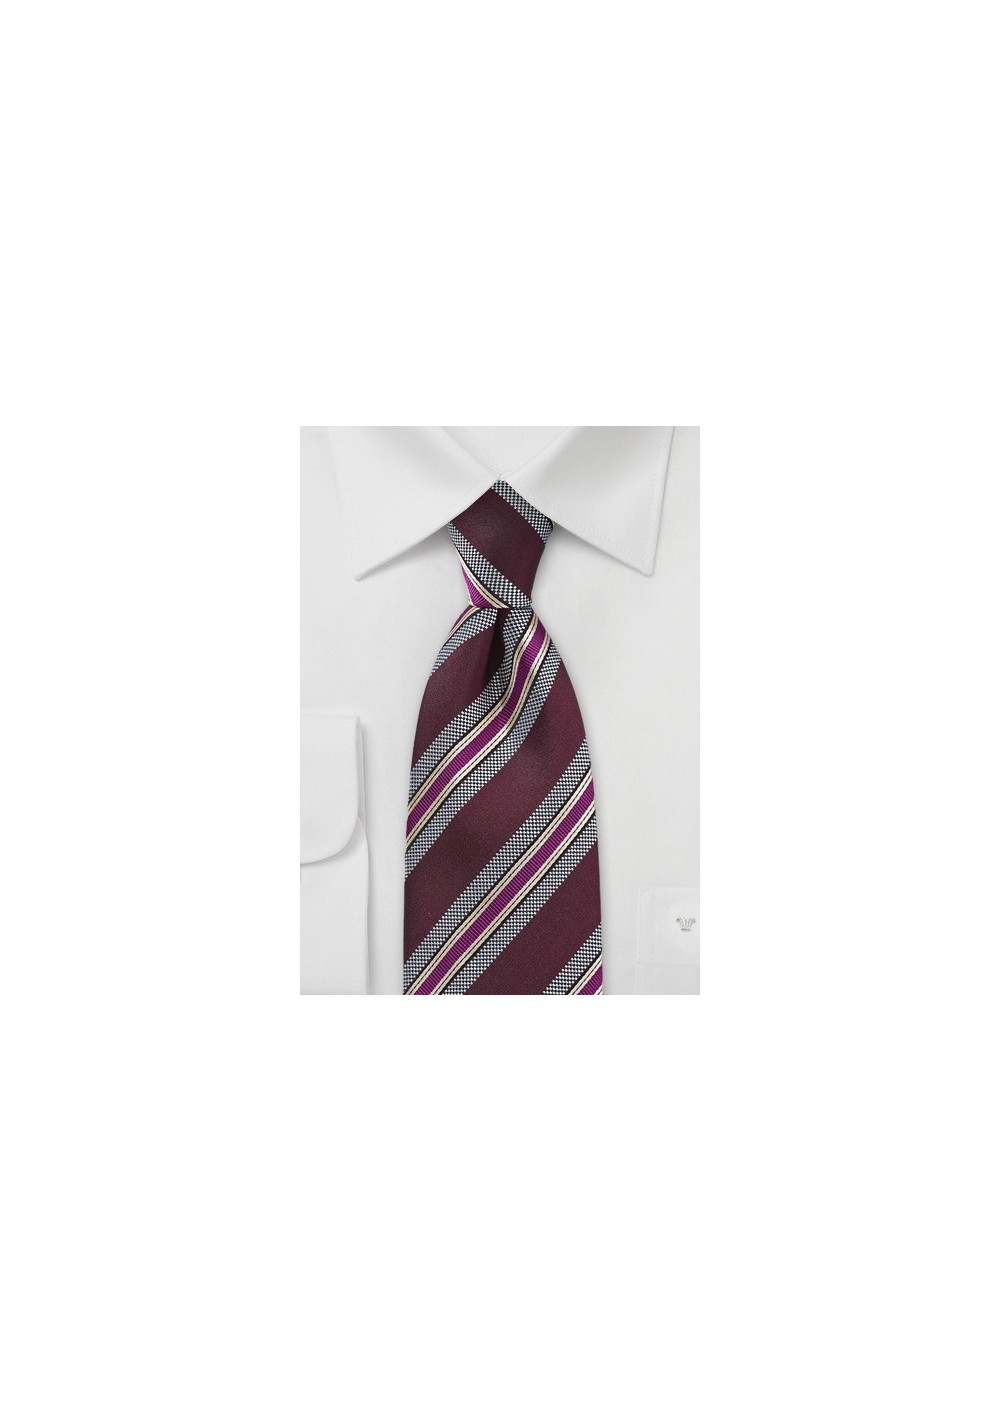 Graphic Striped Tie in Burgundy and Magenta